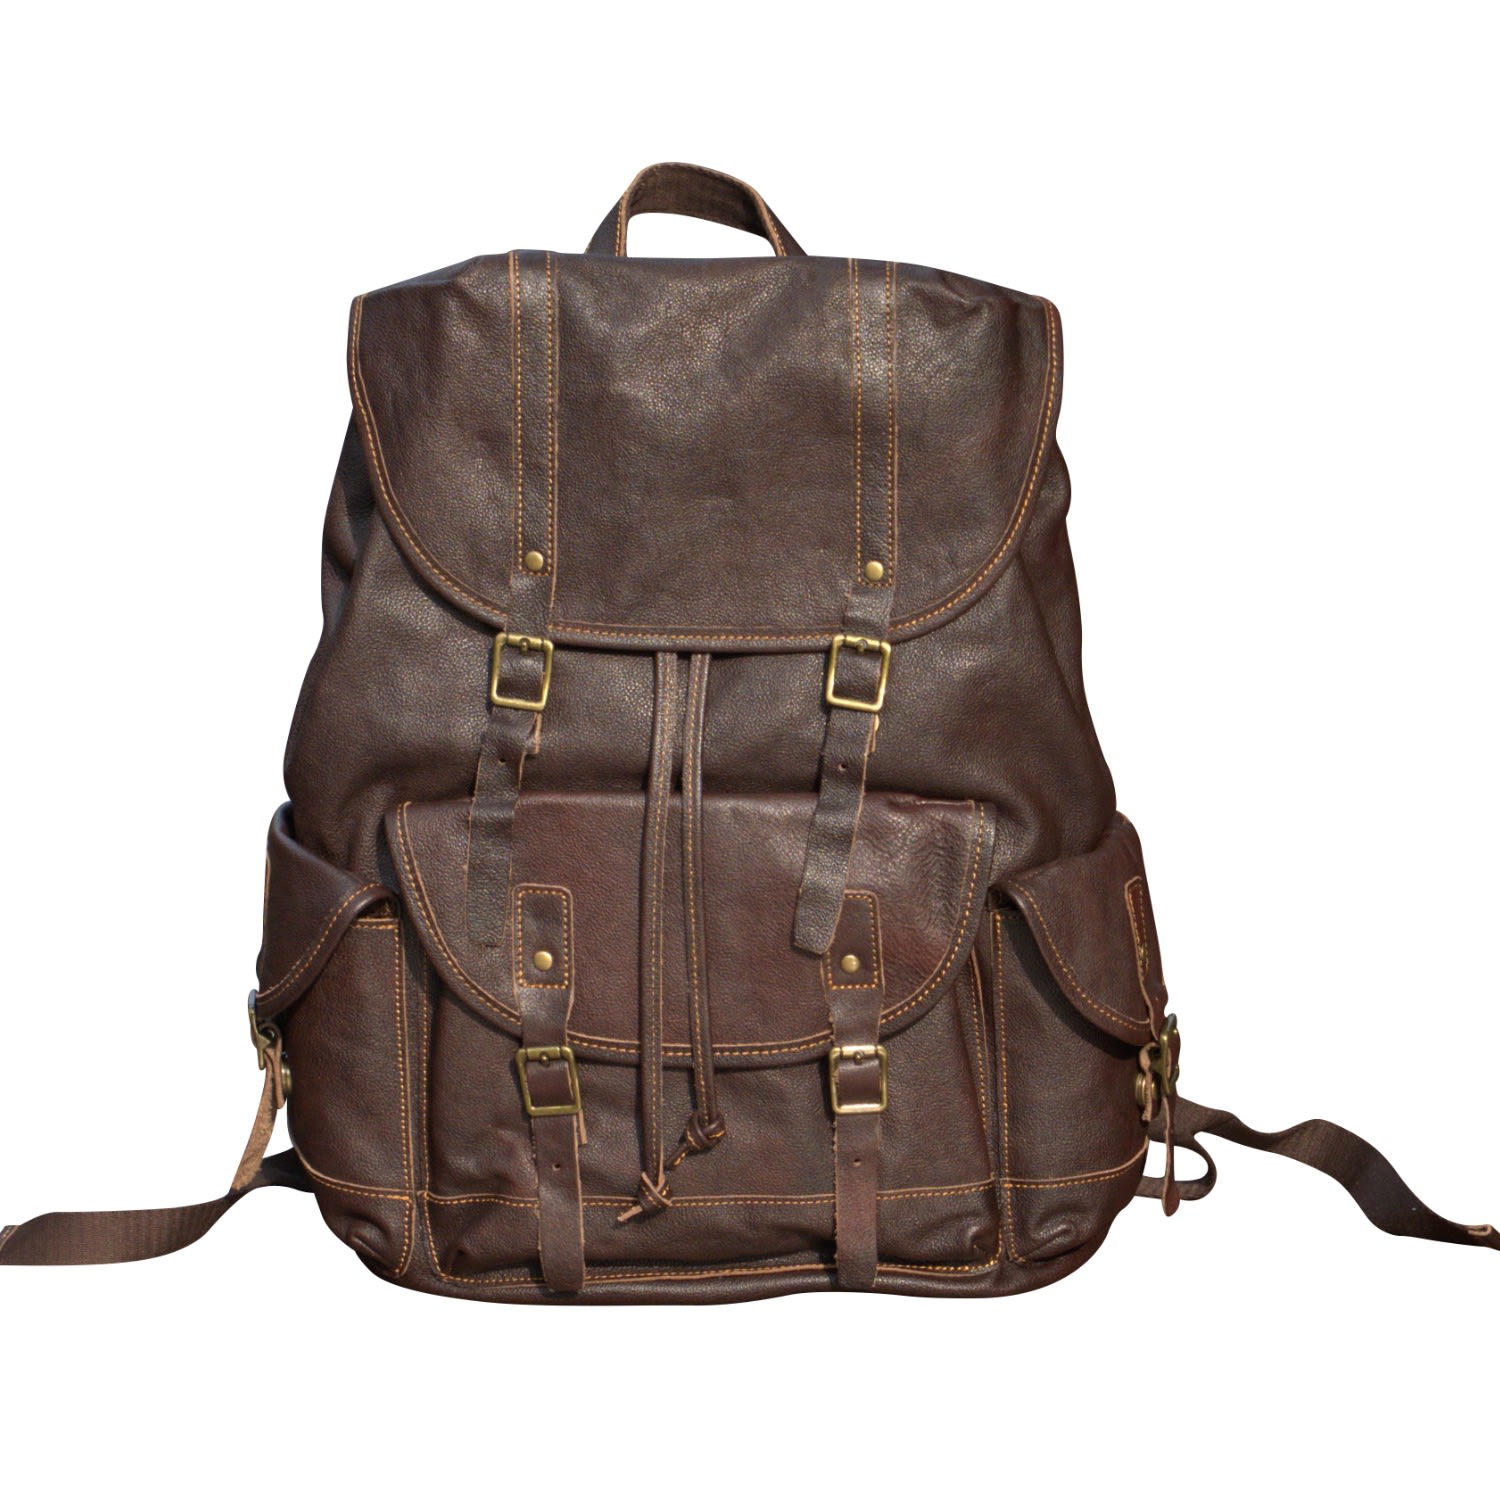 Men’s Military Style Leather Backpack - Taupe Brown Touri